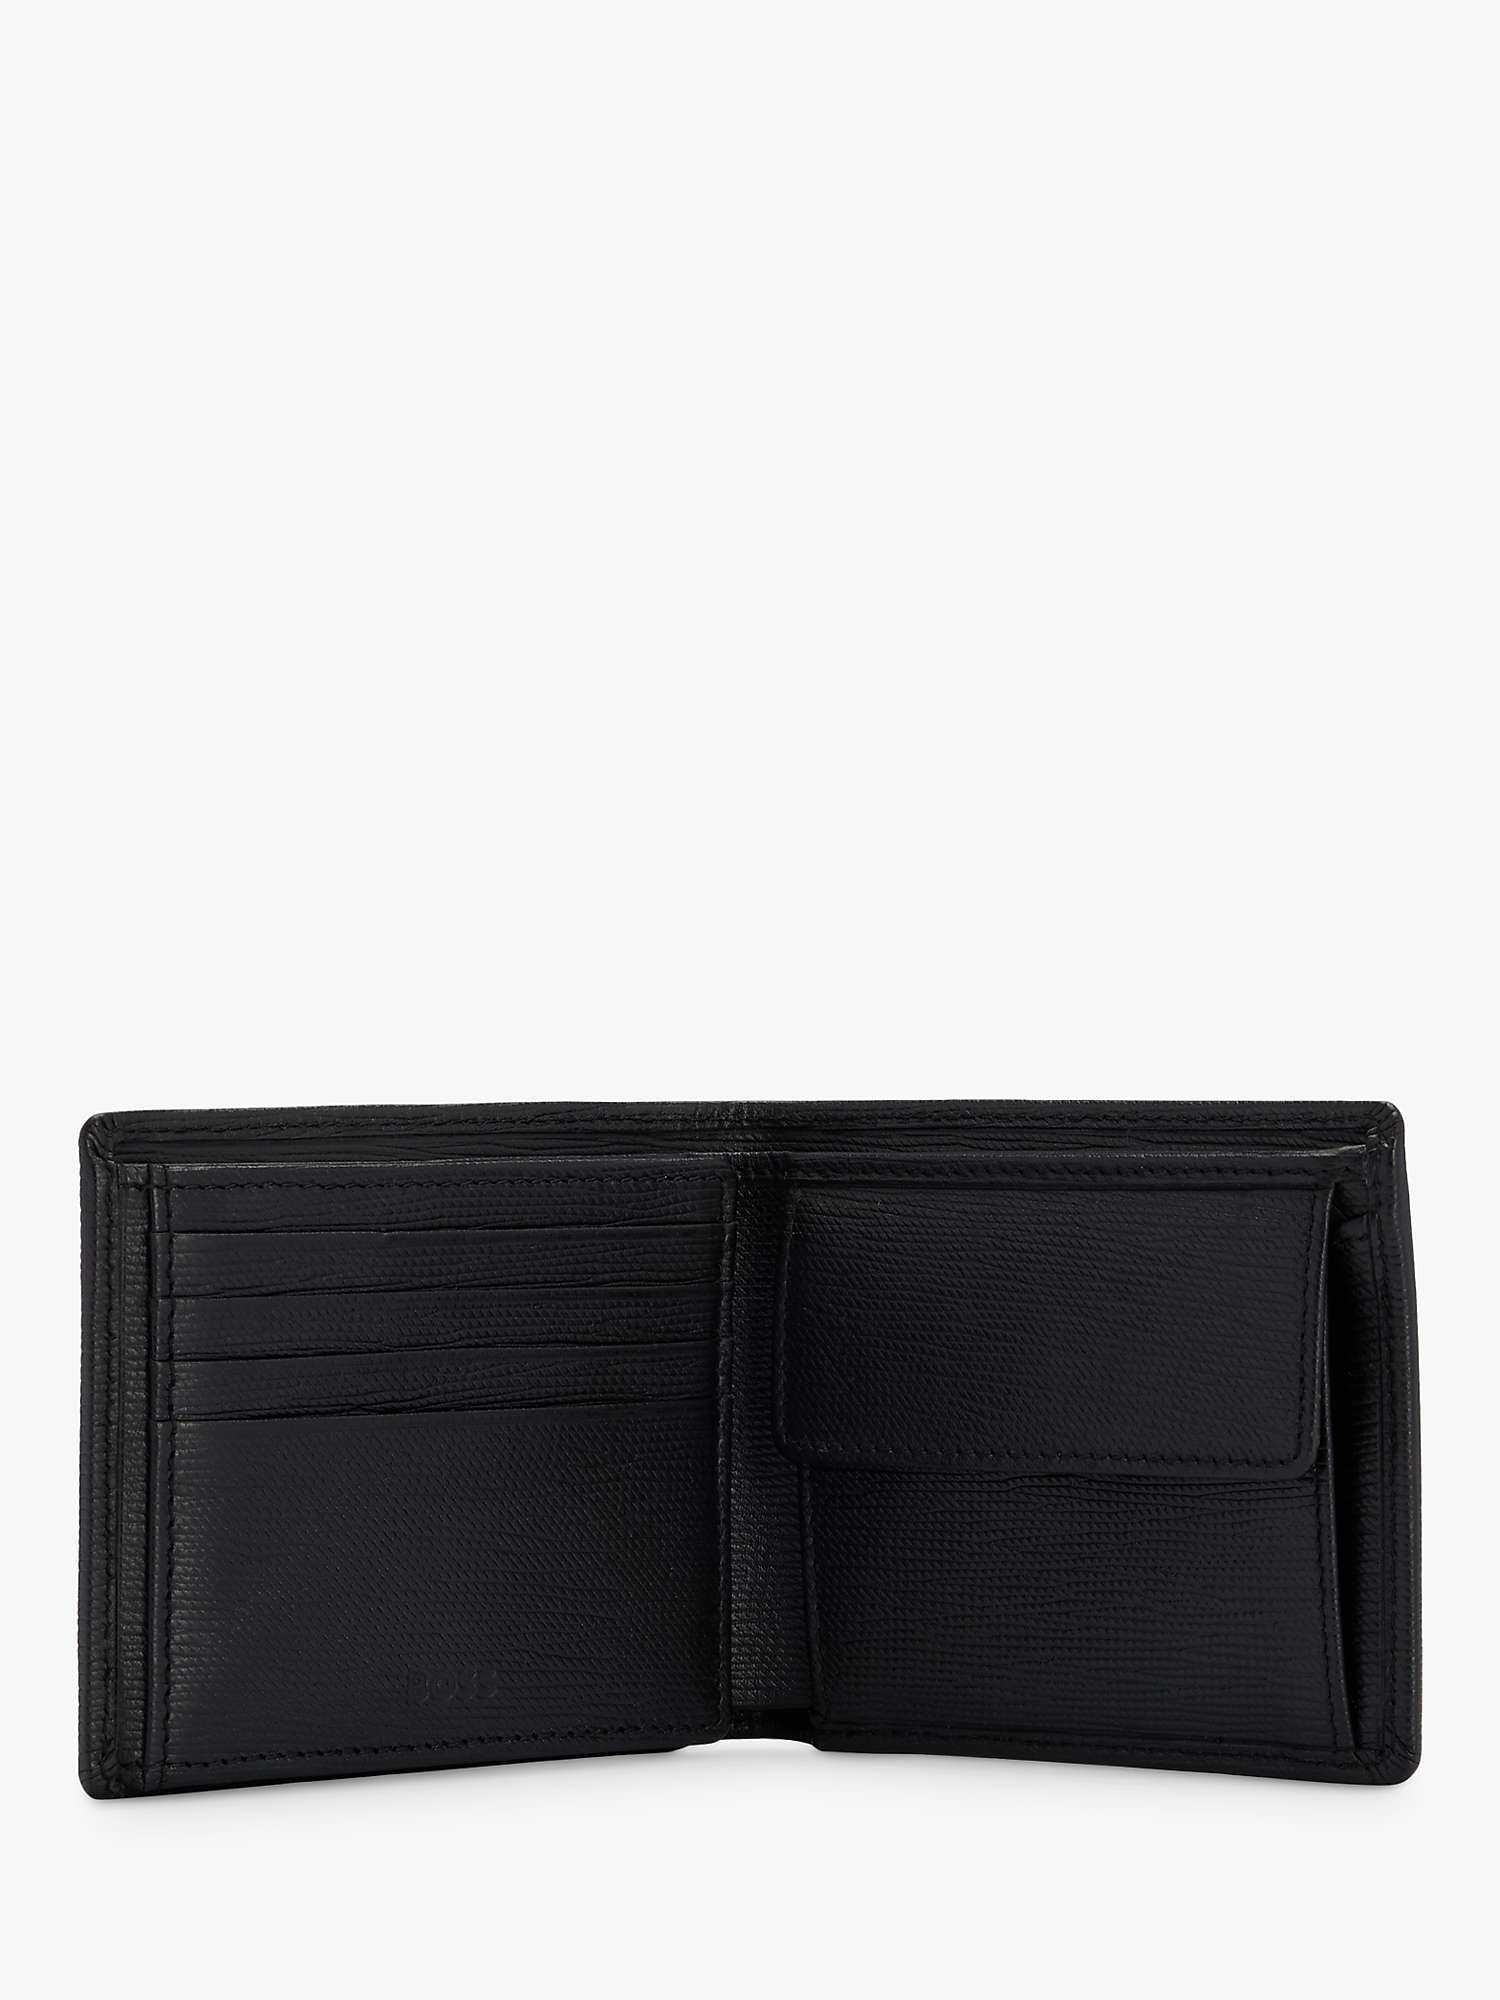 Buy BOSS Gallery Trifold Tumbled Leather Wallet, Black Online at johnlewis.com